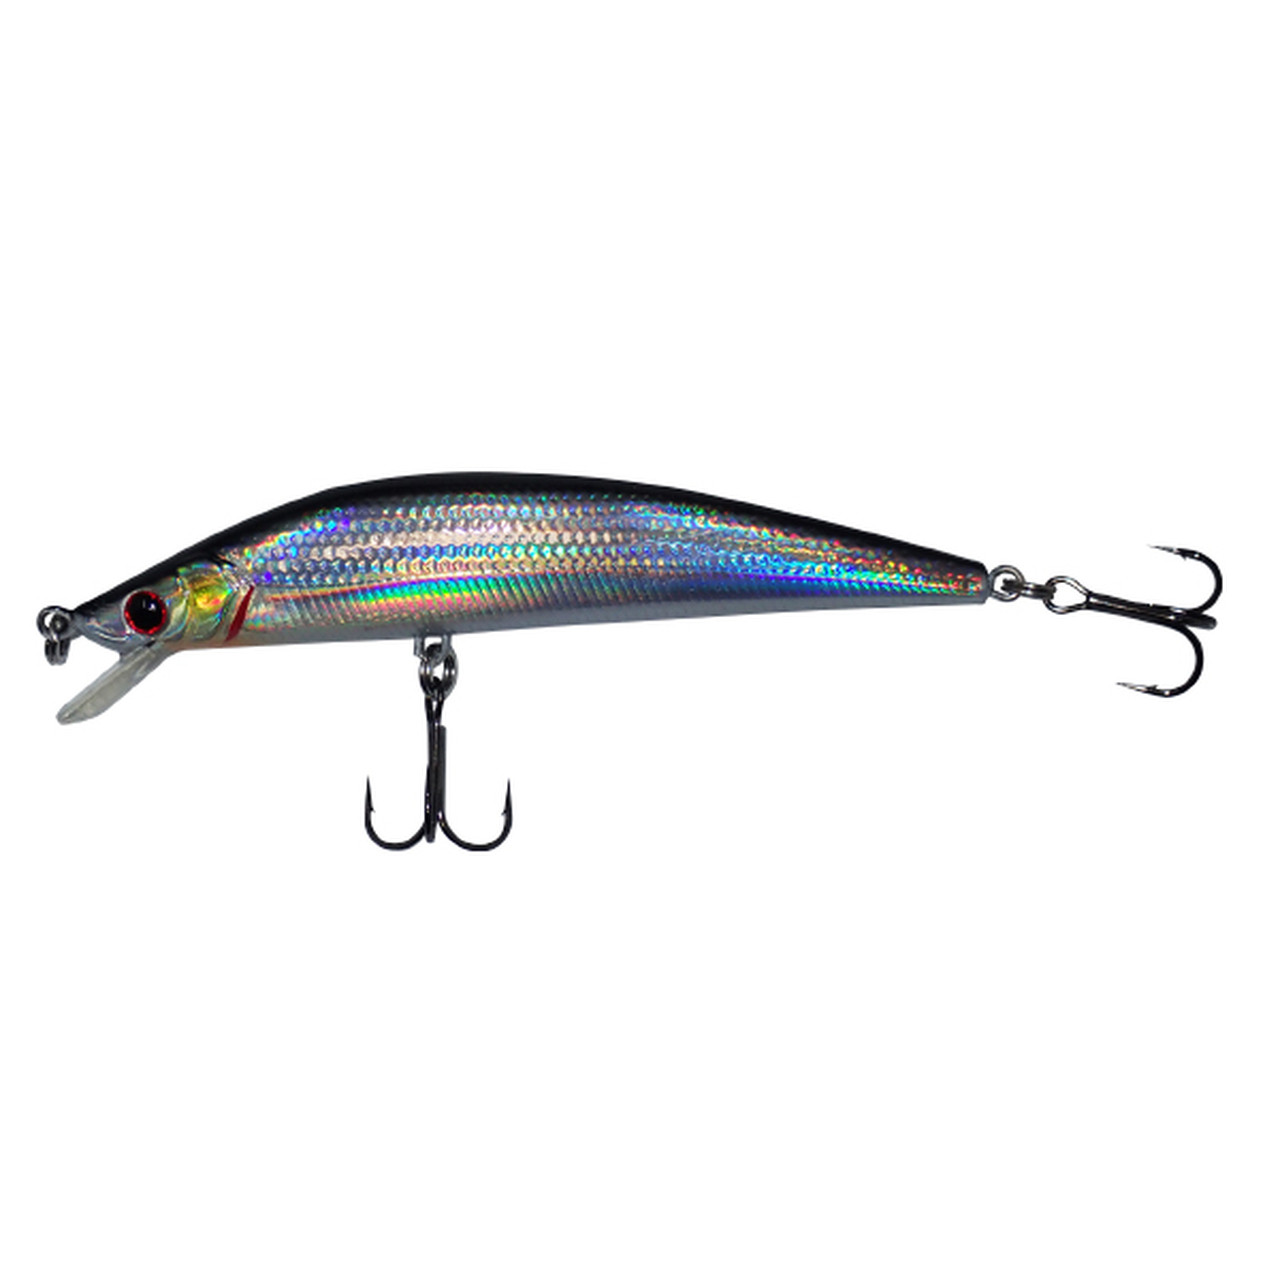 SteelShad Floater Diver Series Fishing Lure - Classic - 1/2 oz. ~ 4 in. -  FISH307.com